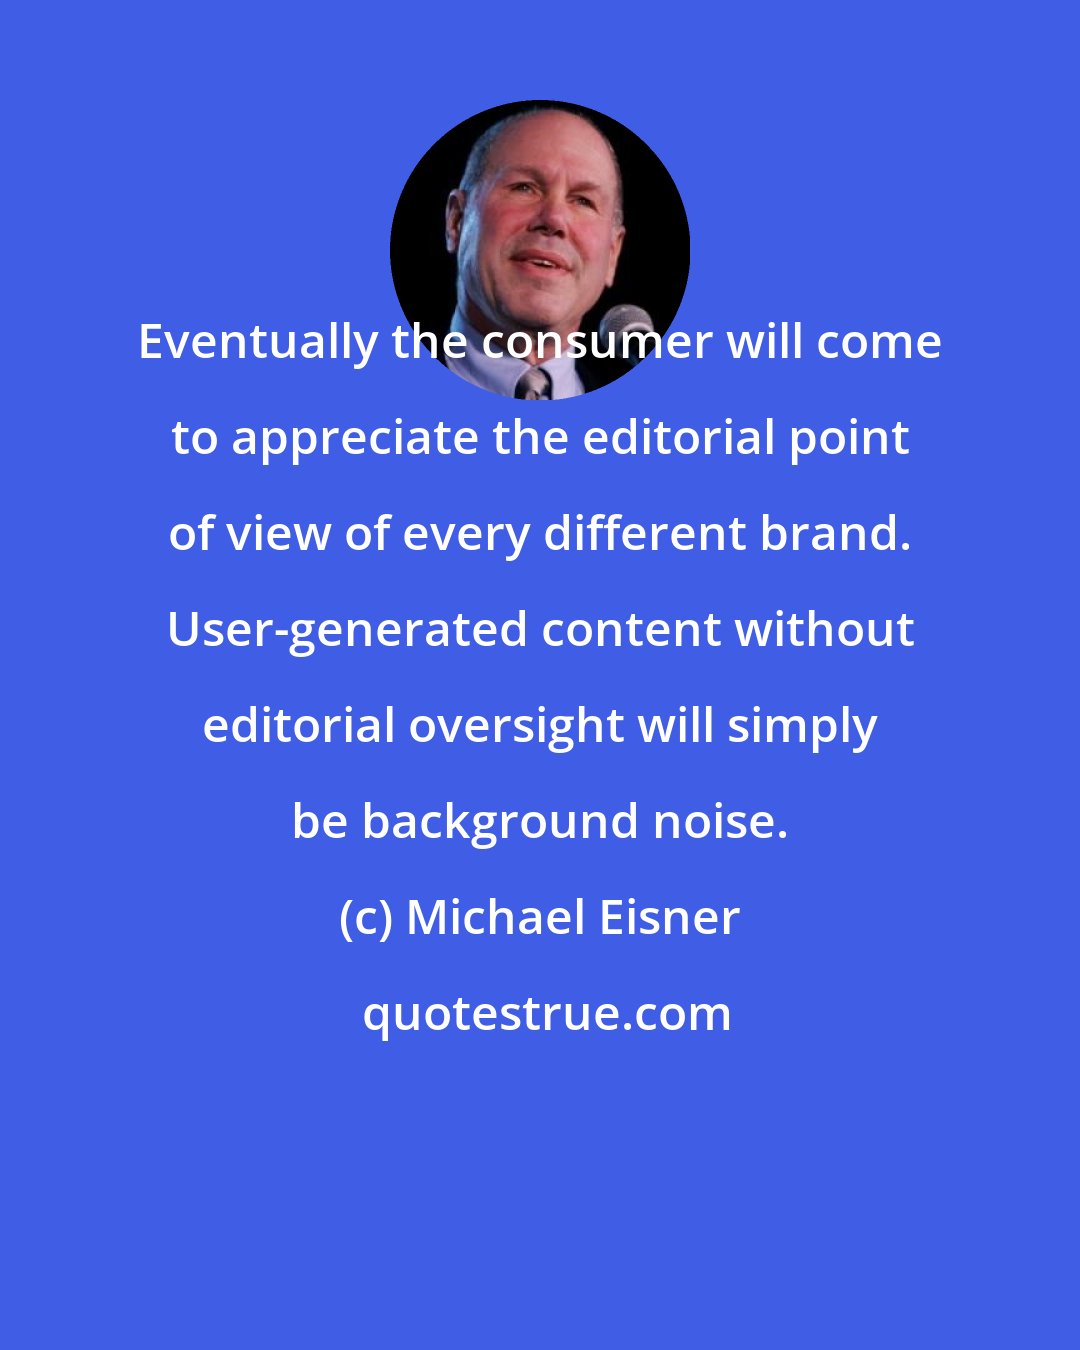 Michael Eisner: Eventually the consumer will come to appreciate the editorial point of view of every different brand. User-generated content without editorial oversight will simply be background noise.